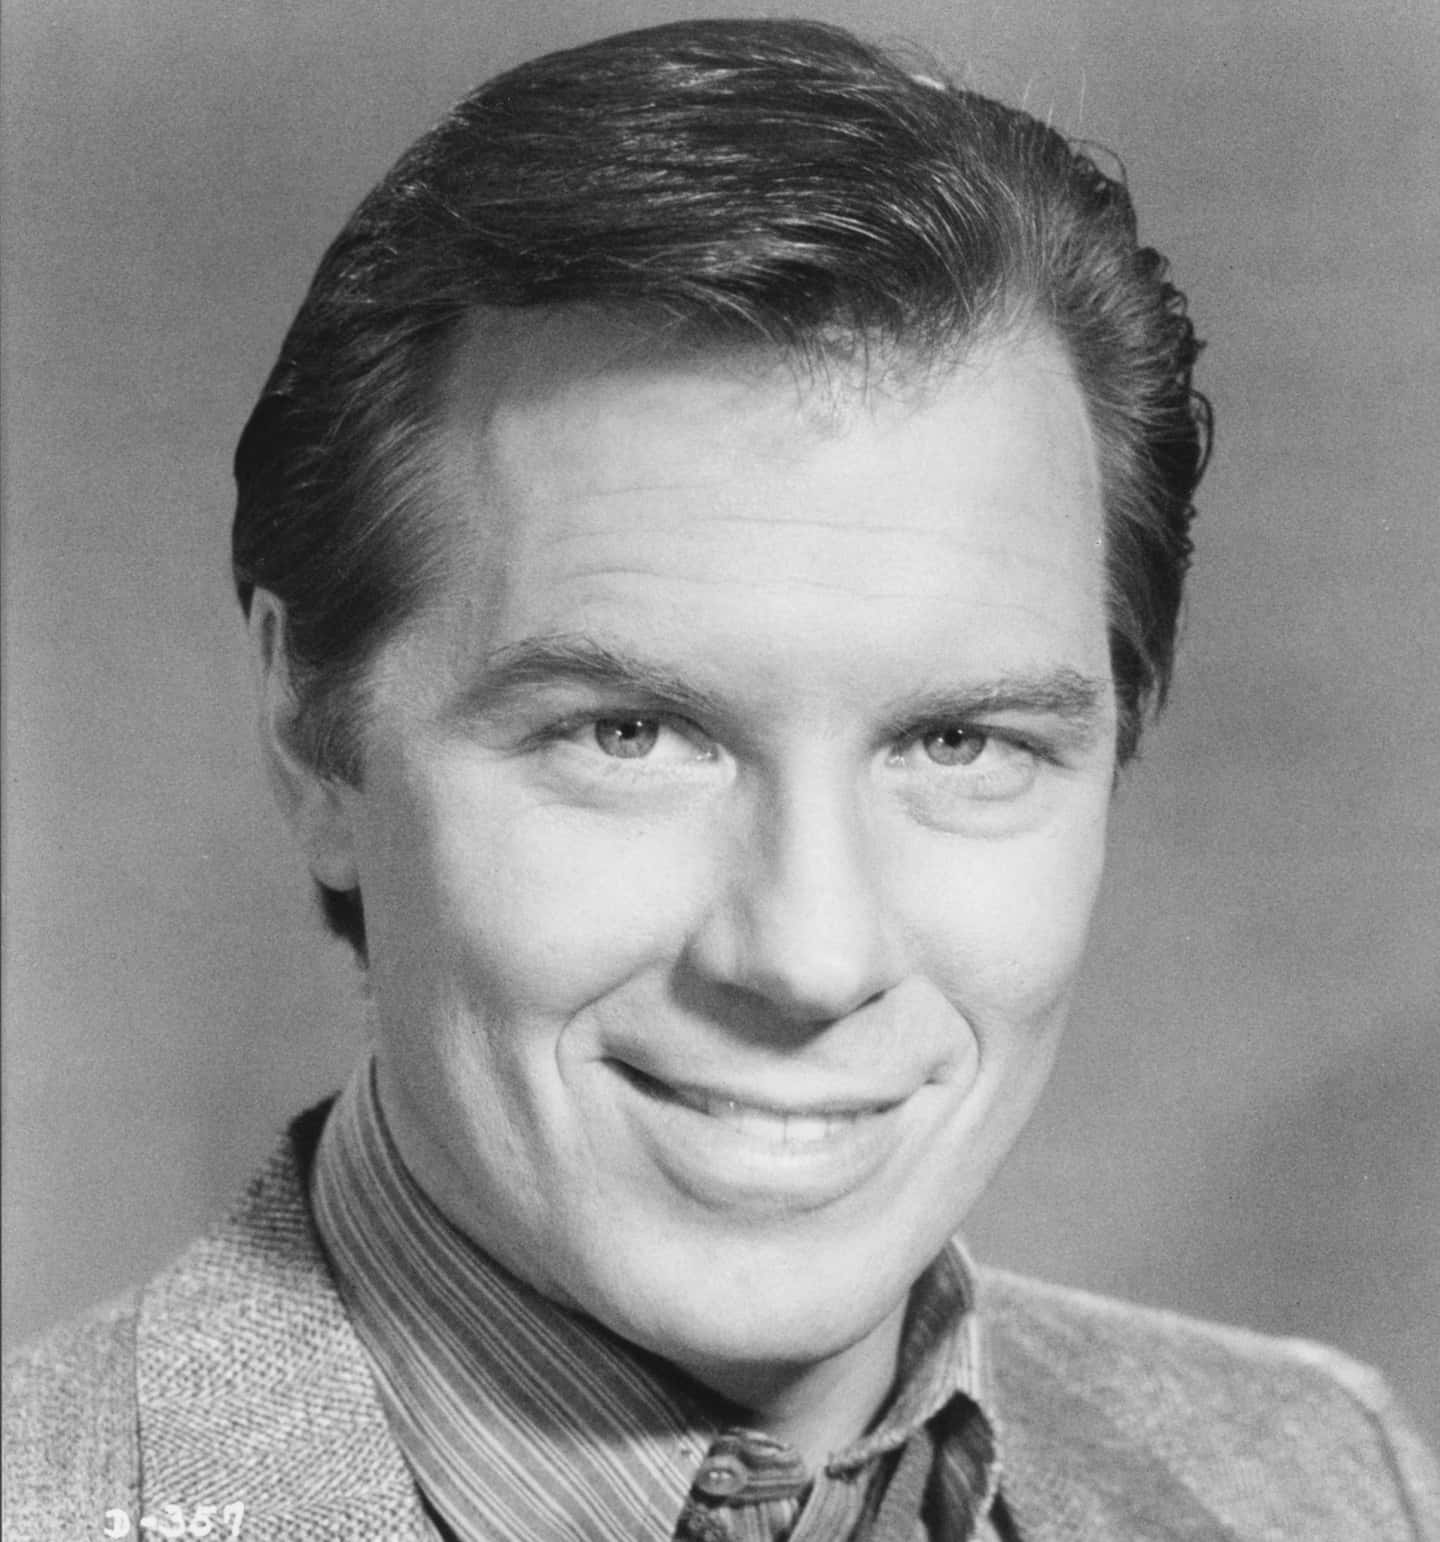 Actormichael Mckean Is Best Known For His Roles In Various Iconic Films And Television Shows. With His Incredible Talent And Versatility, Mckean Has Captivated Audiences Around The World. Whether He's Playing A Comedic Character Or A Dramatic Role, He Always Delivers A Brilliant Performance. His Presence On Screen Always Leaves A Lasting Impression. Fondo de pantalla